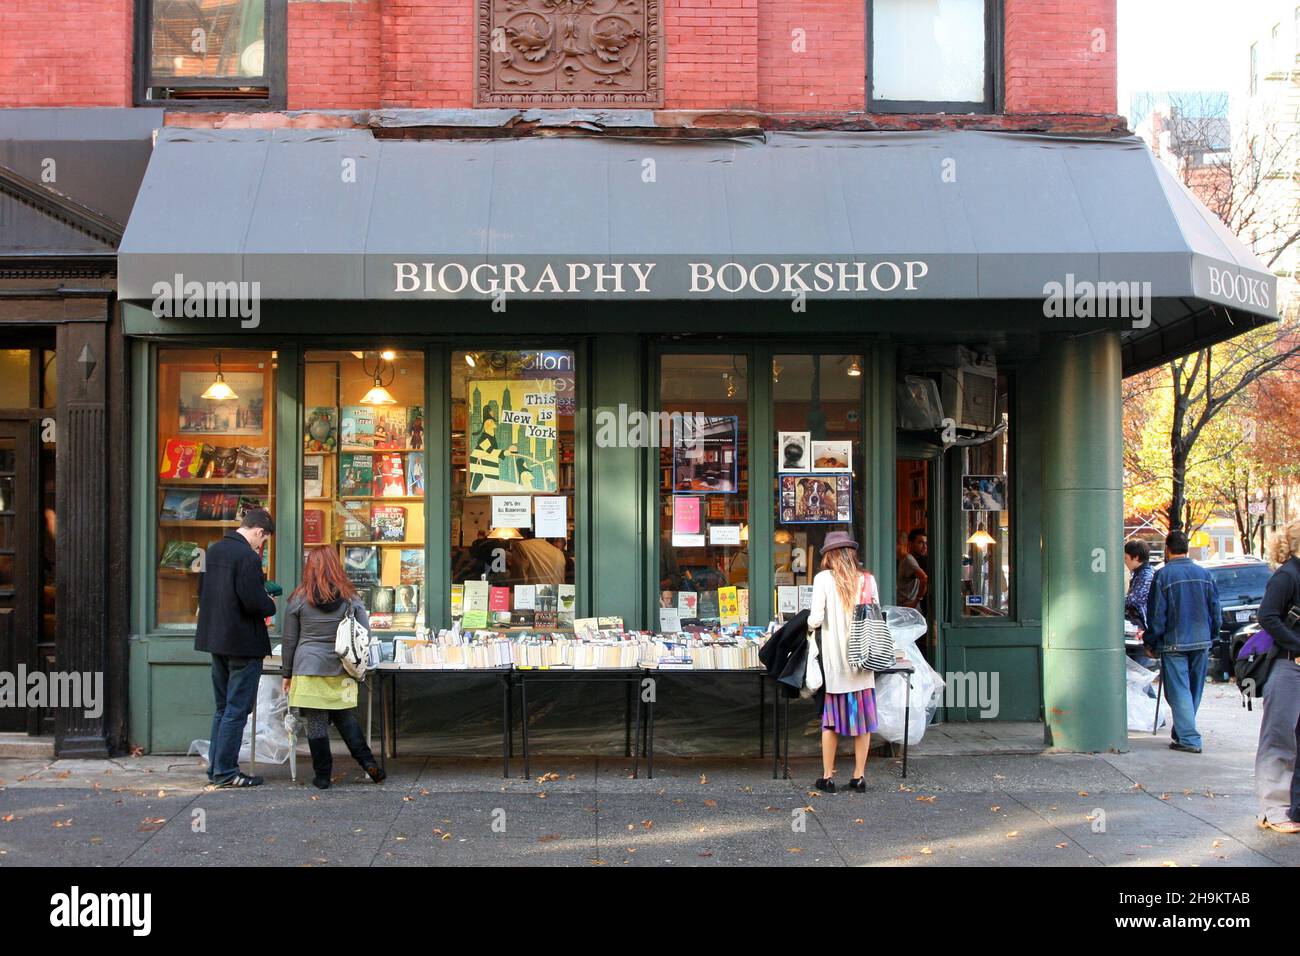 [historical storefront] Biography Bookshop, 400 Bleecker St, New York, NYC storefront photo of a bookstore in the West Village neighborhood. Stock Photo